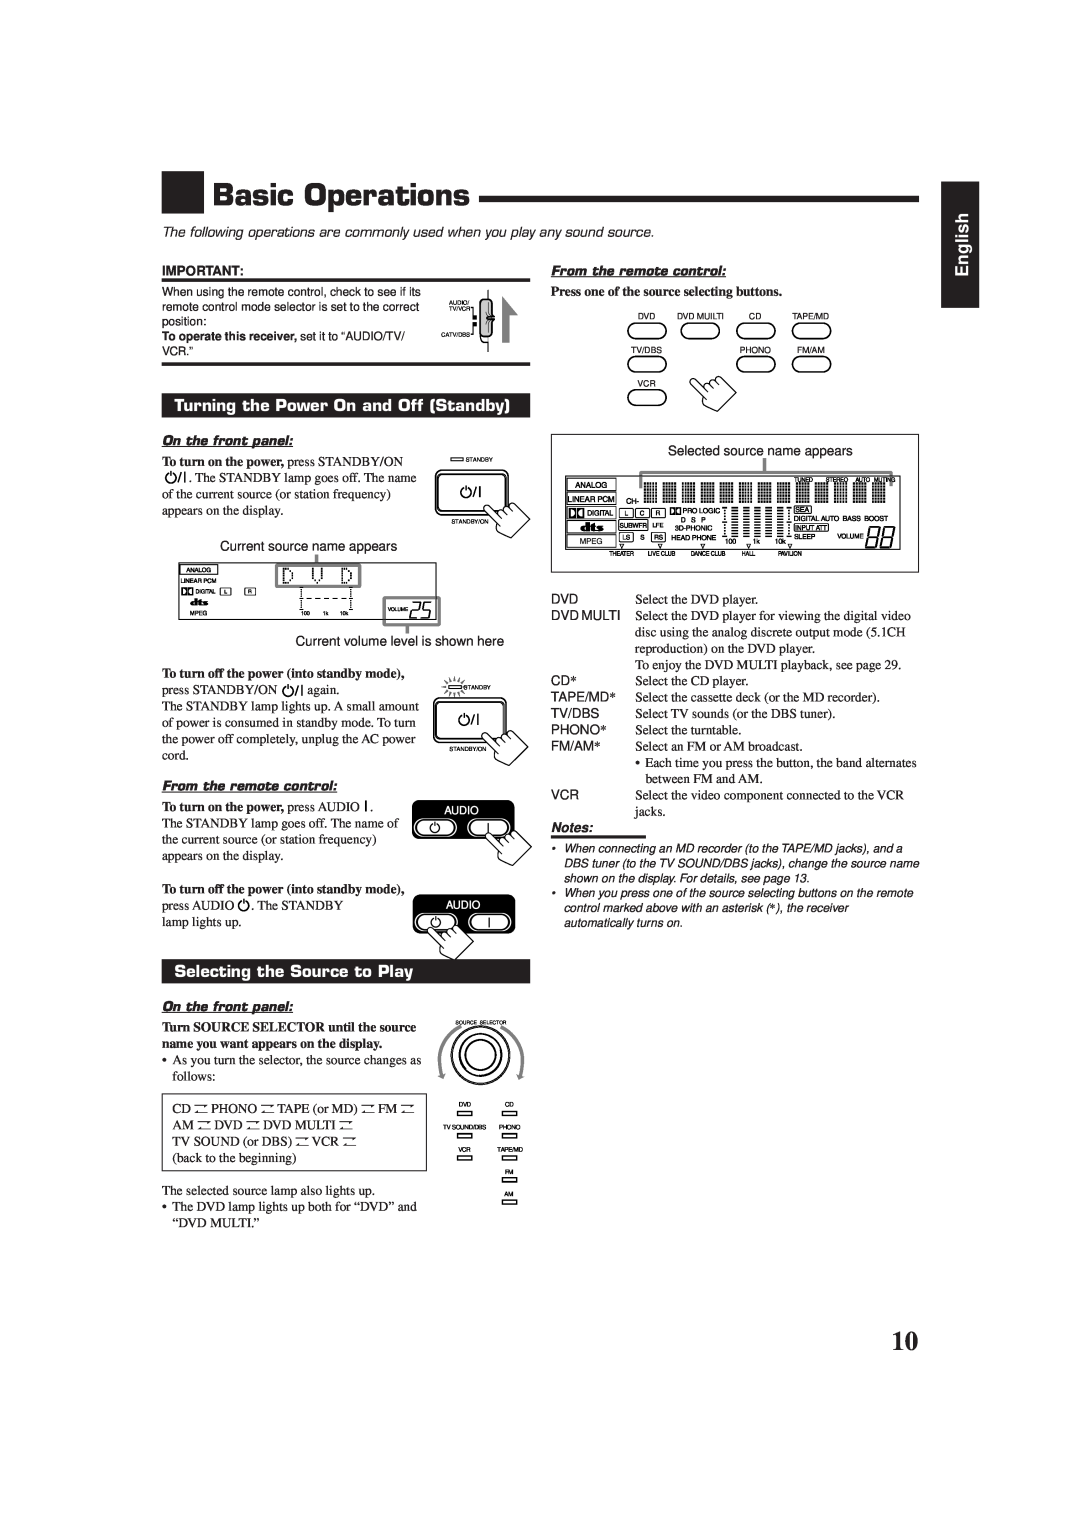 JVC RX-7001PGD manual Basic Operations, English, Turning the Power On and Off Standby, Selecting the Source to Play 